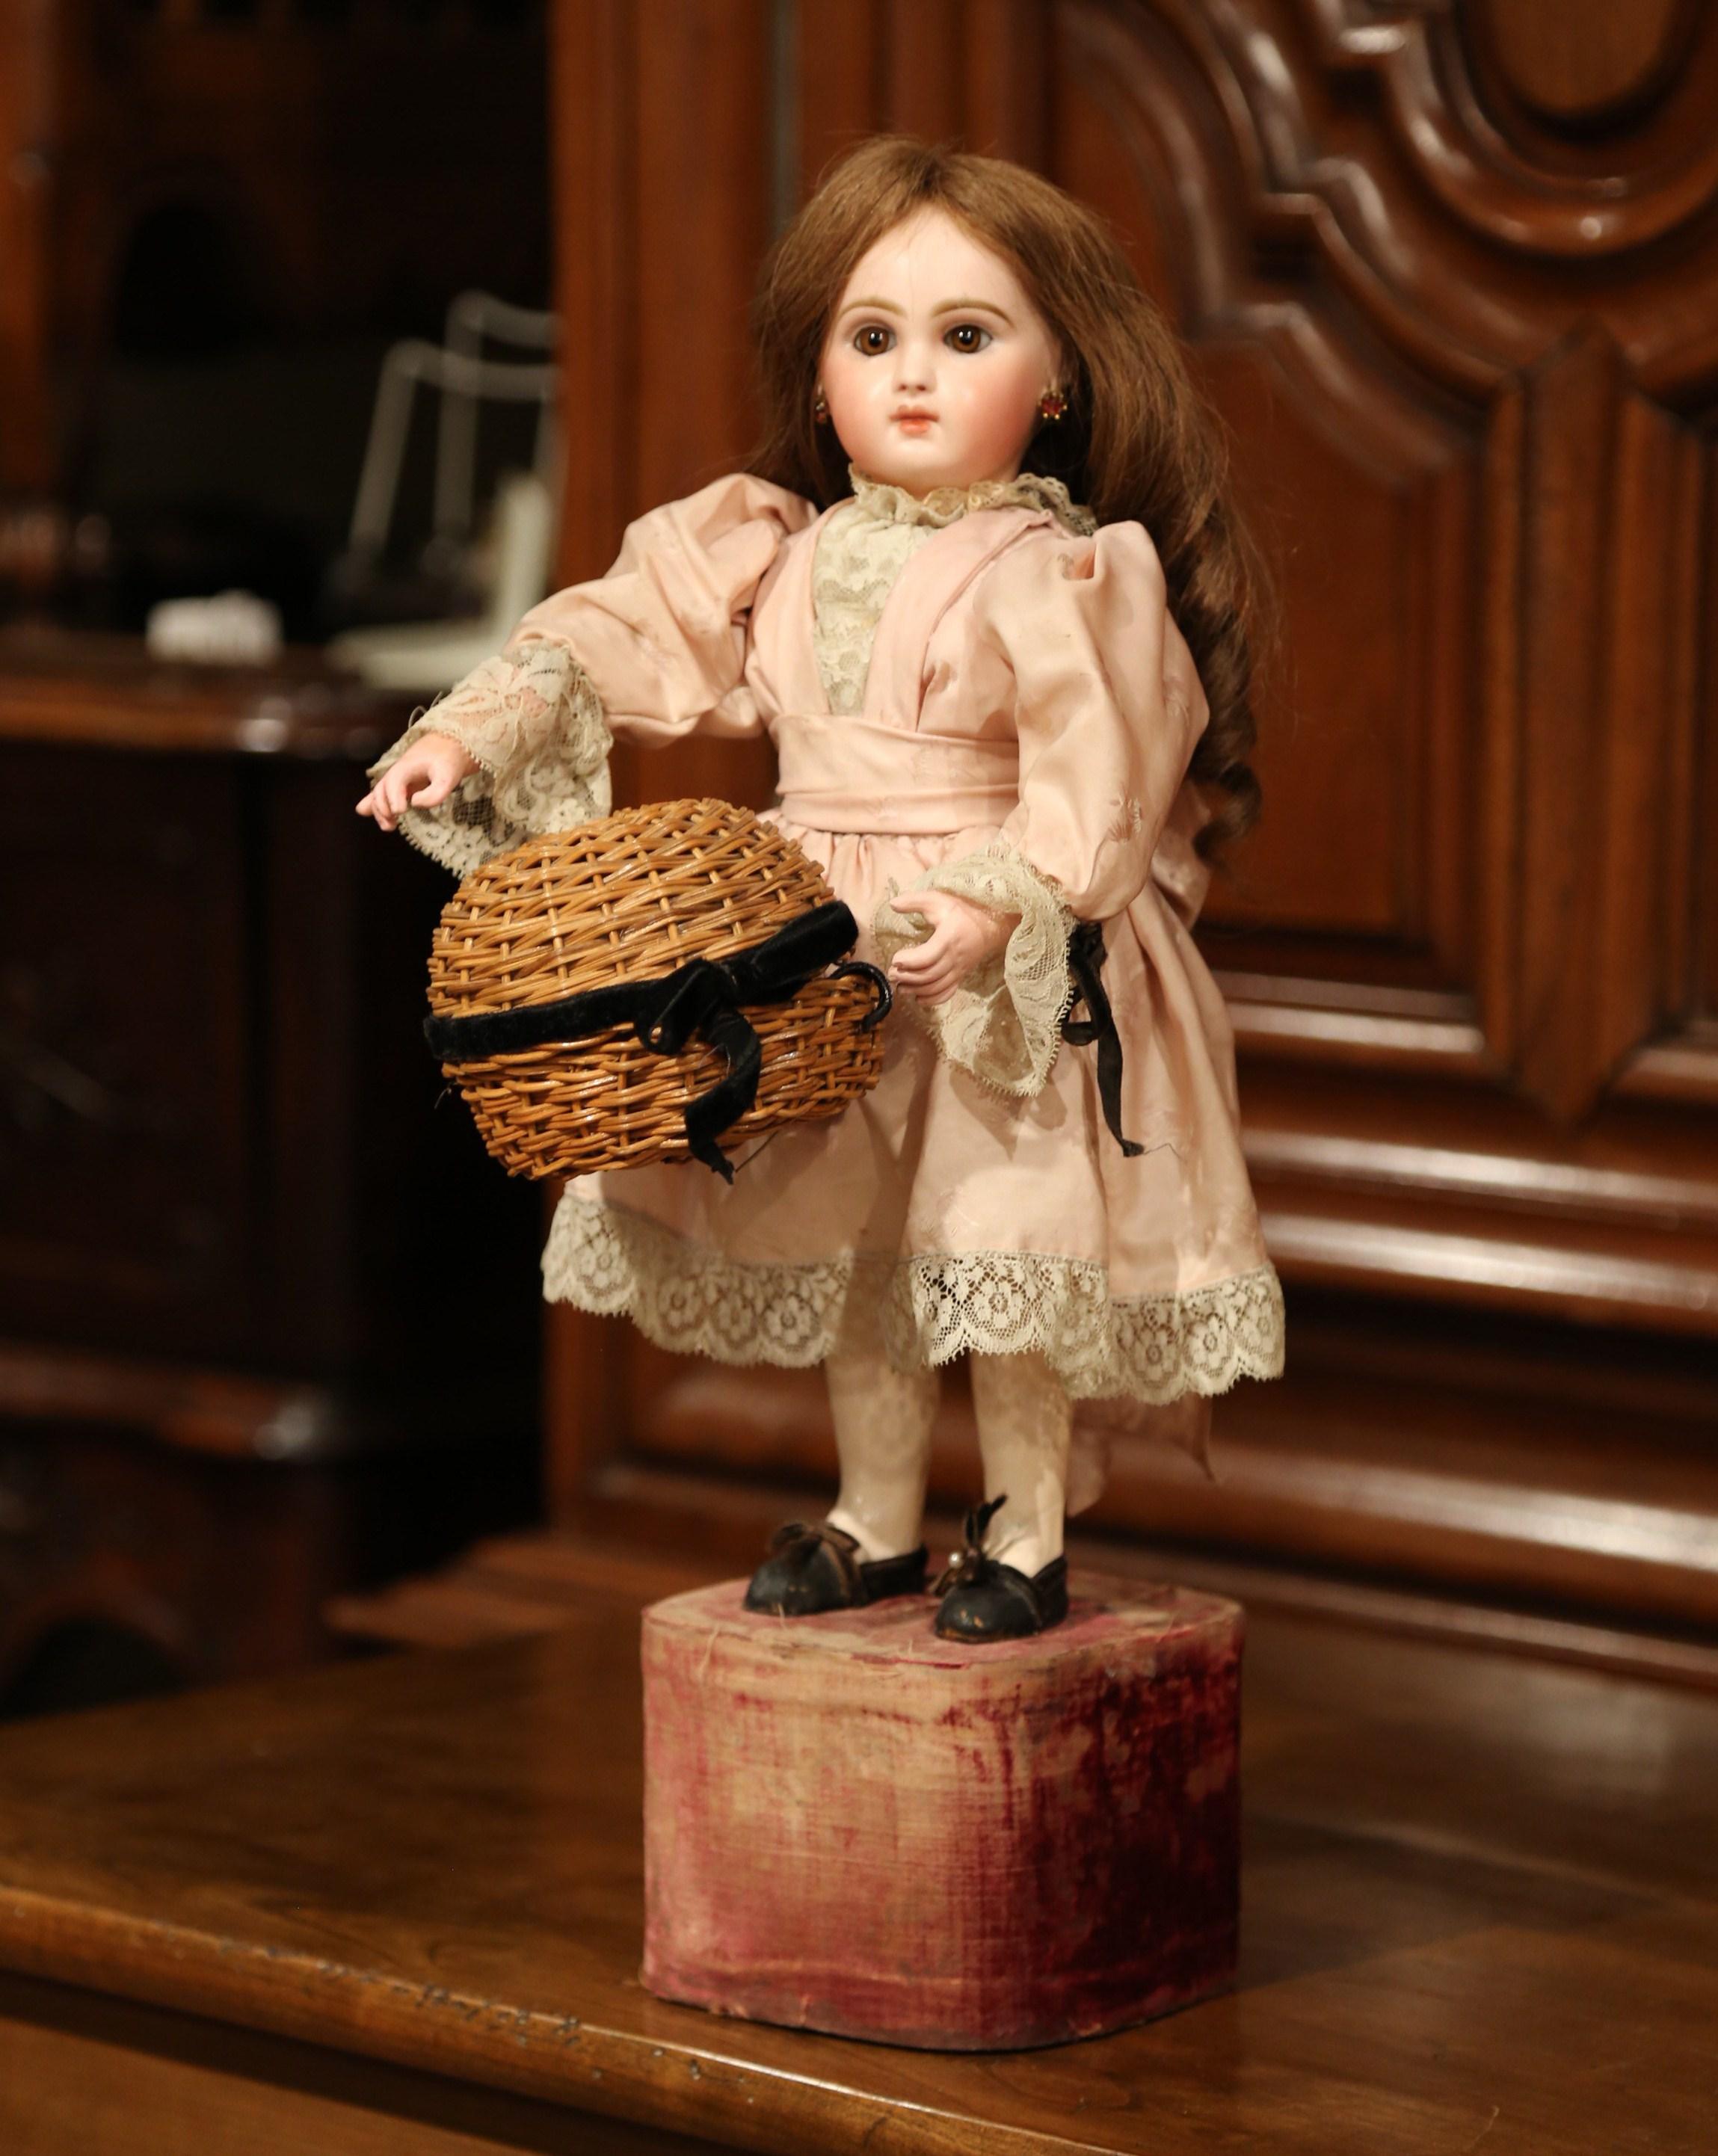 This is a true treasure for seasoned doll collectors! This 19th century doll by Jumeau was crafted in France circa 1870. The doll's head and right arm are in motion when the music is played by cranking the knob on the base. The head and hands are